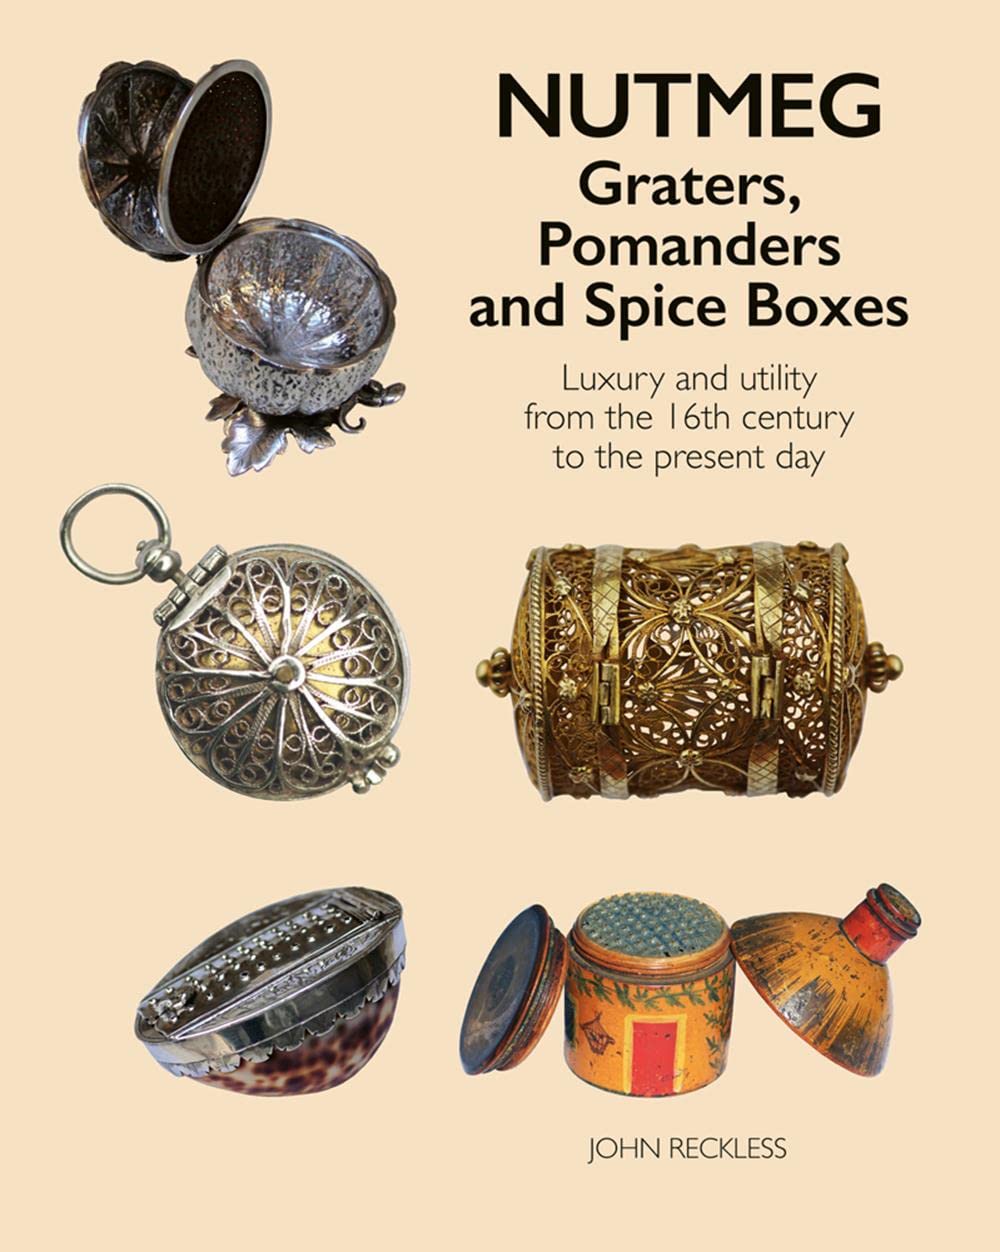 Nutmeg: Graters, Pomanders & Spice Boxes: Luxury and Utility From the 16th Century to the Present Day (John Reckless)